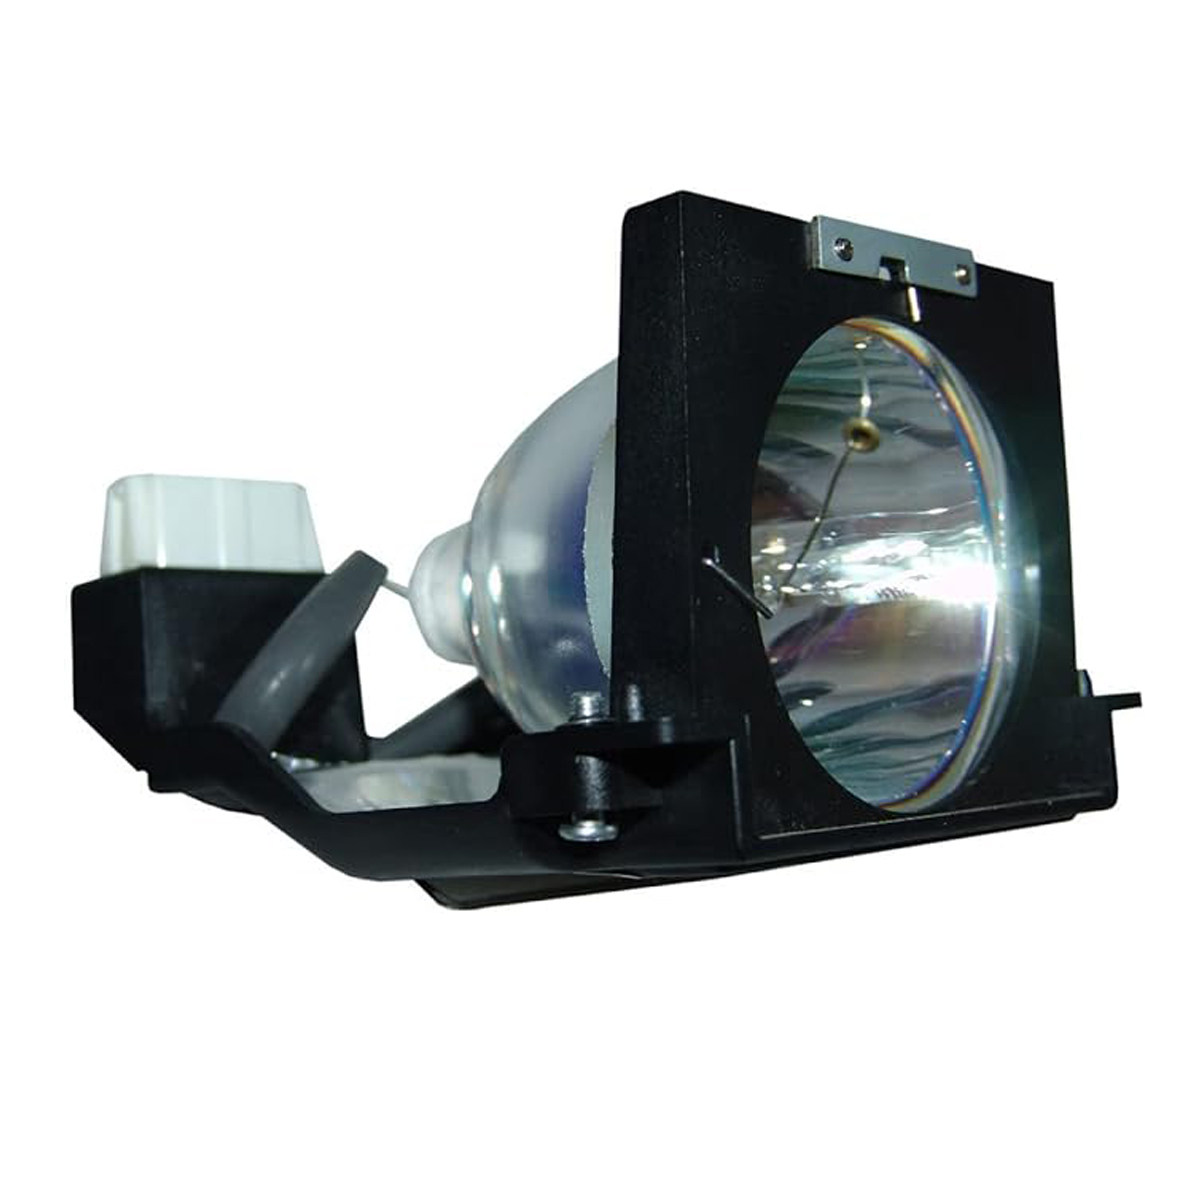 Replacement Projector lamp U2-151/28-650 For Plus U2-1100